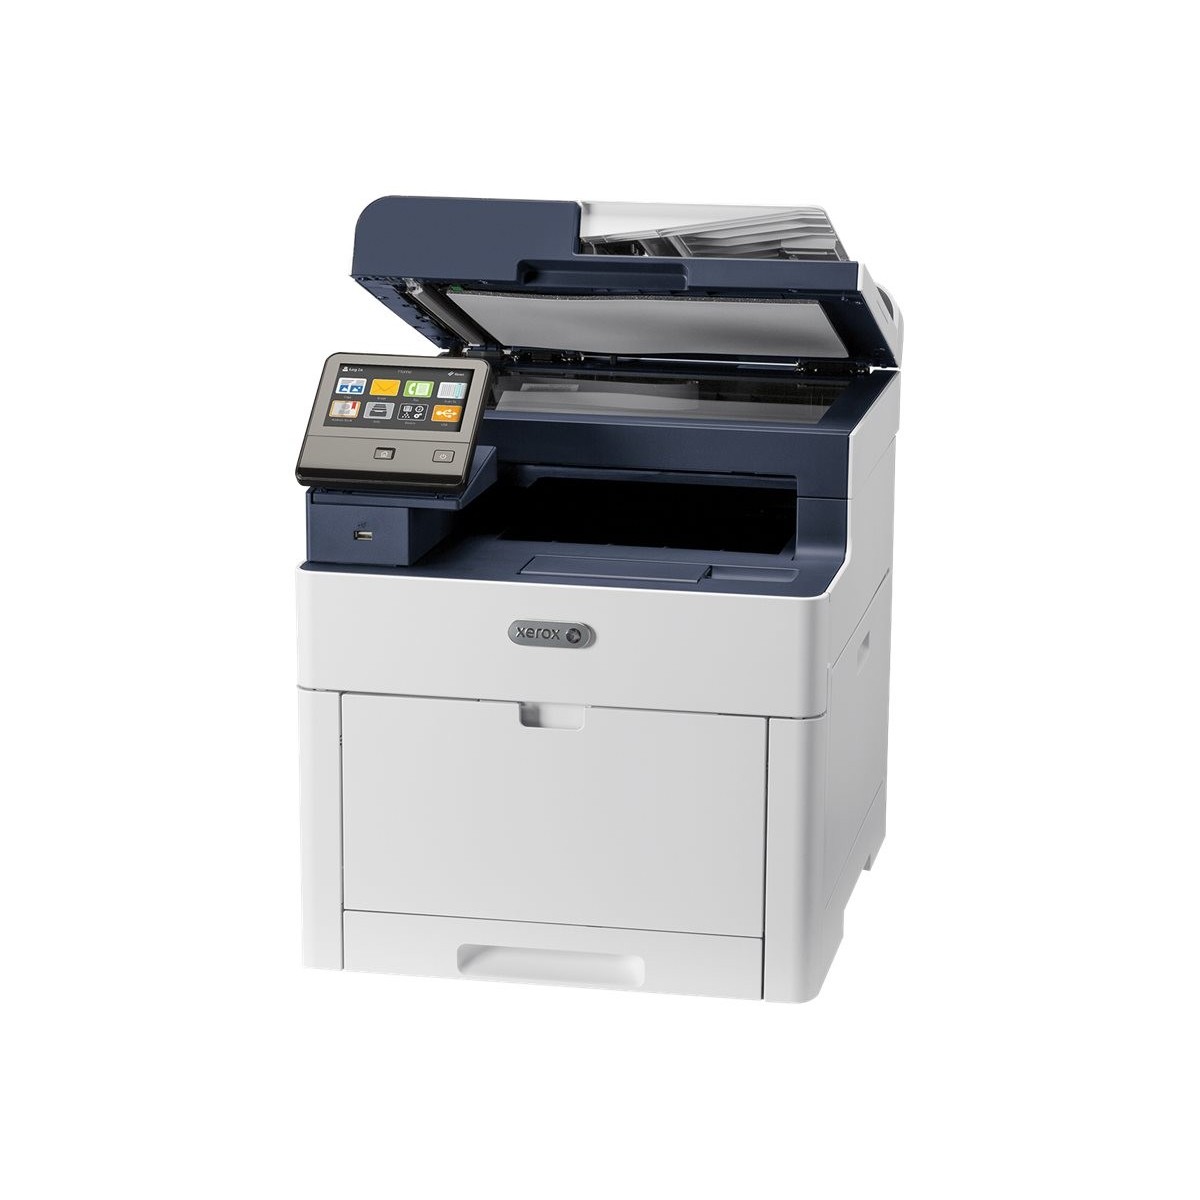 Xerox WorkCentre 6515 Colour Multifunction Printer - A4 - 28/28ppm - Duplex - USB/Ethernet - Sold - Laser - Colour printing - 12